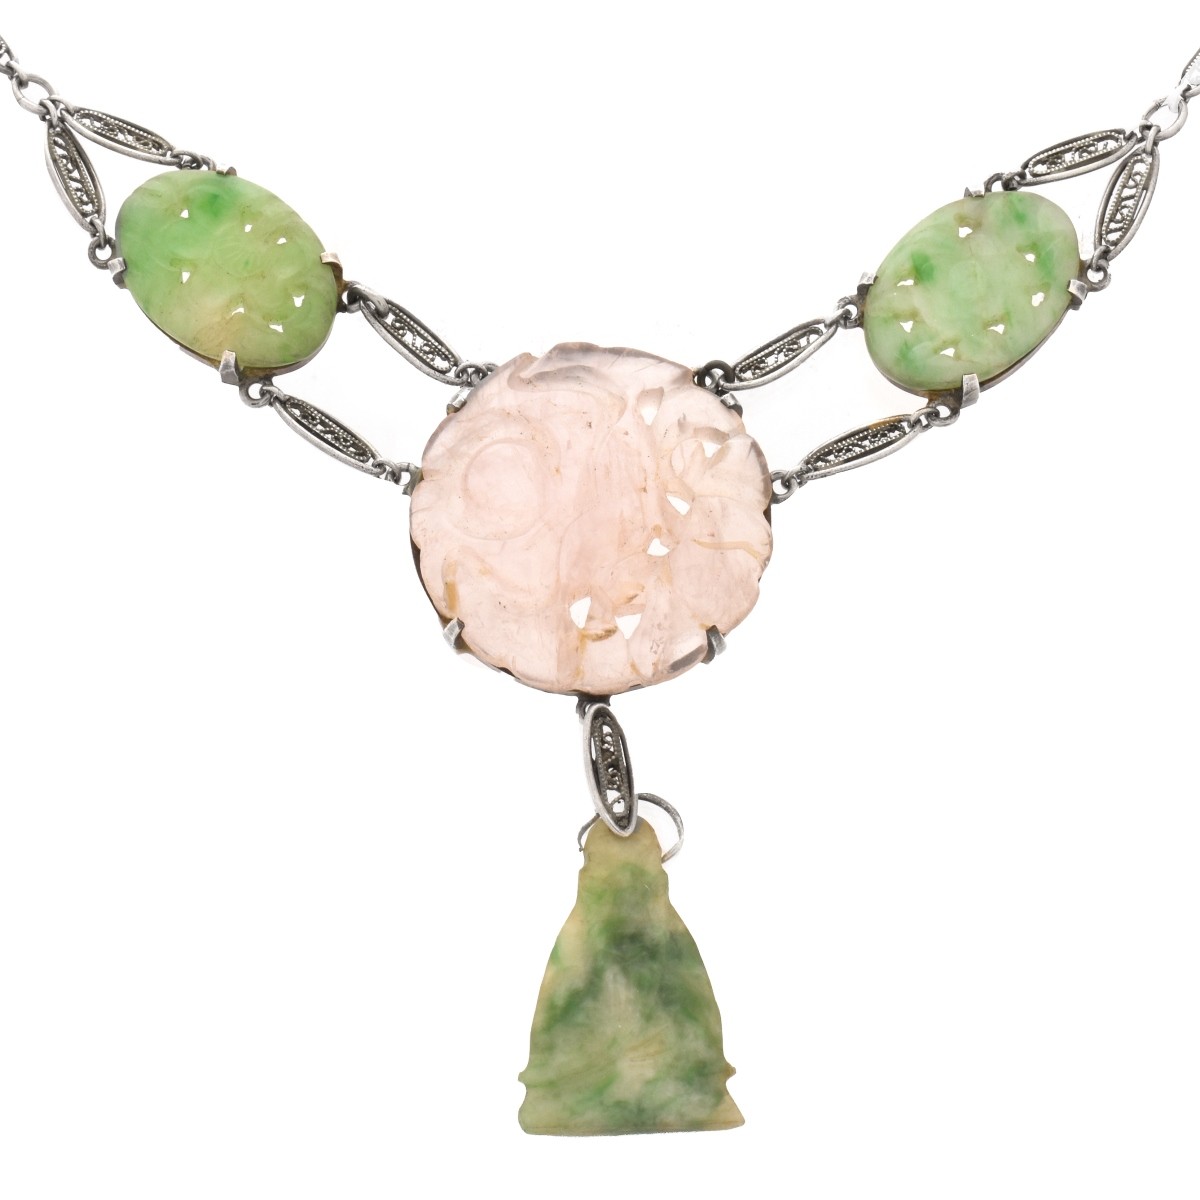 Chinese Jade, Rose Quartz and Silver Necklace